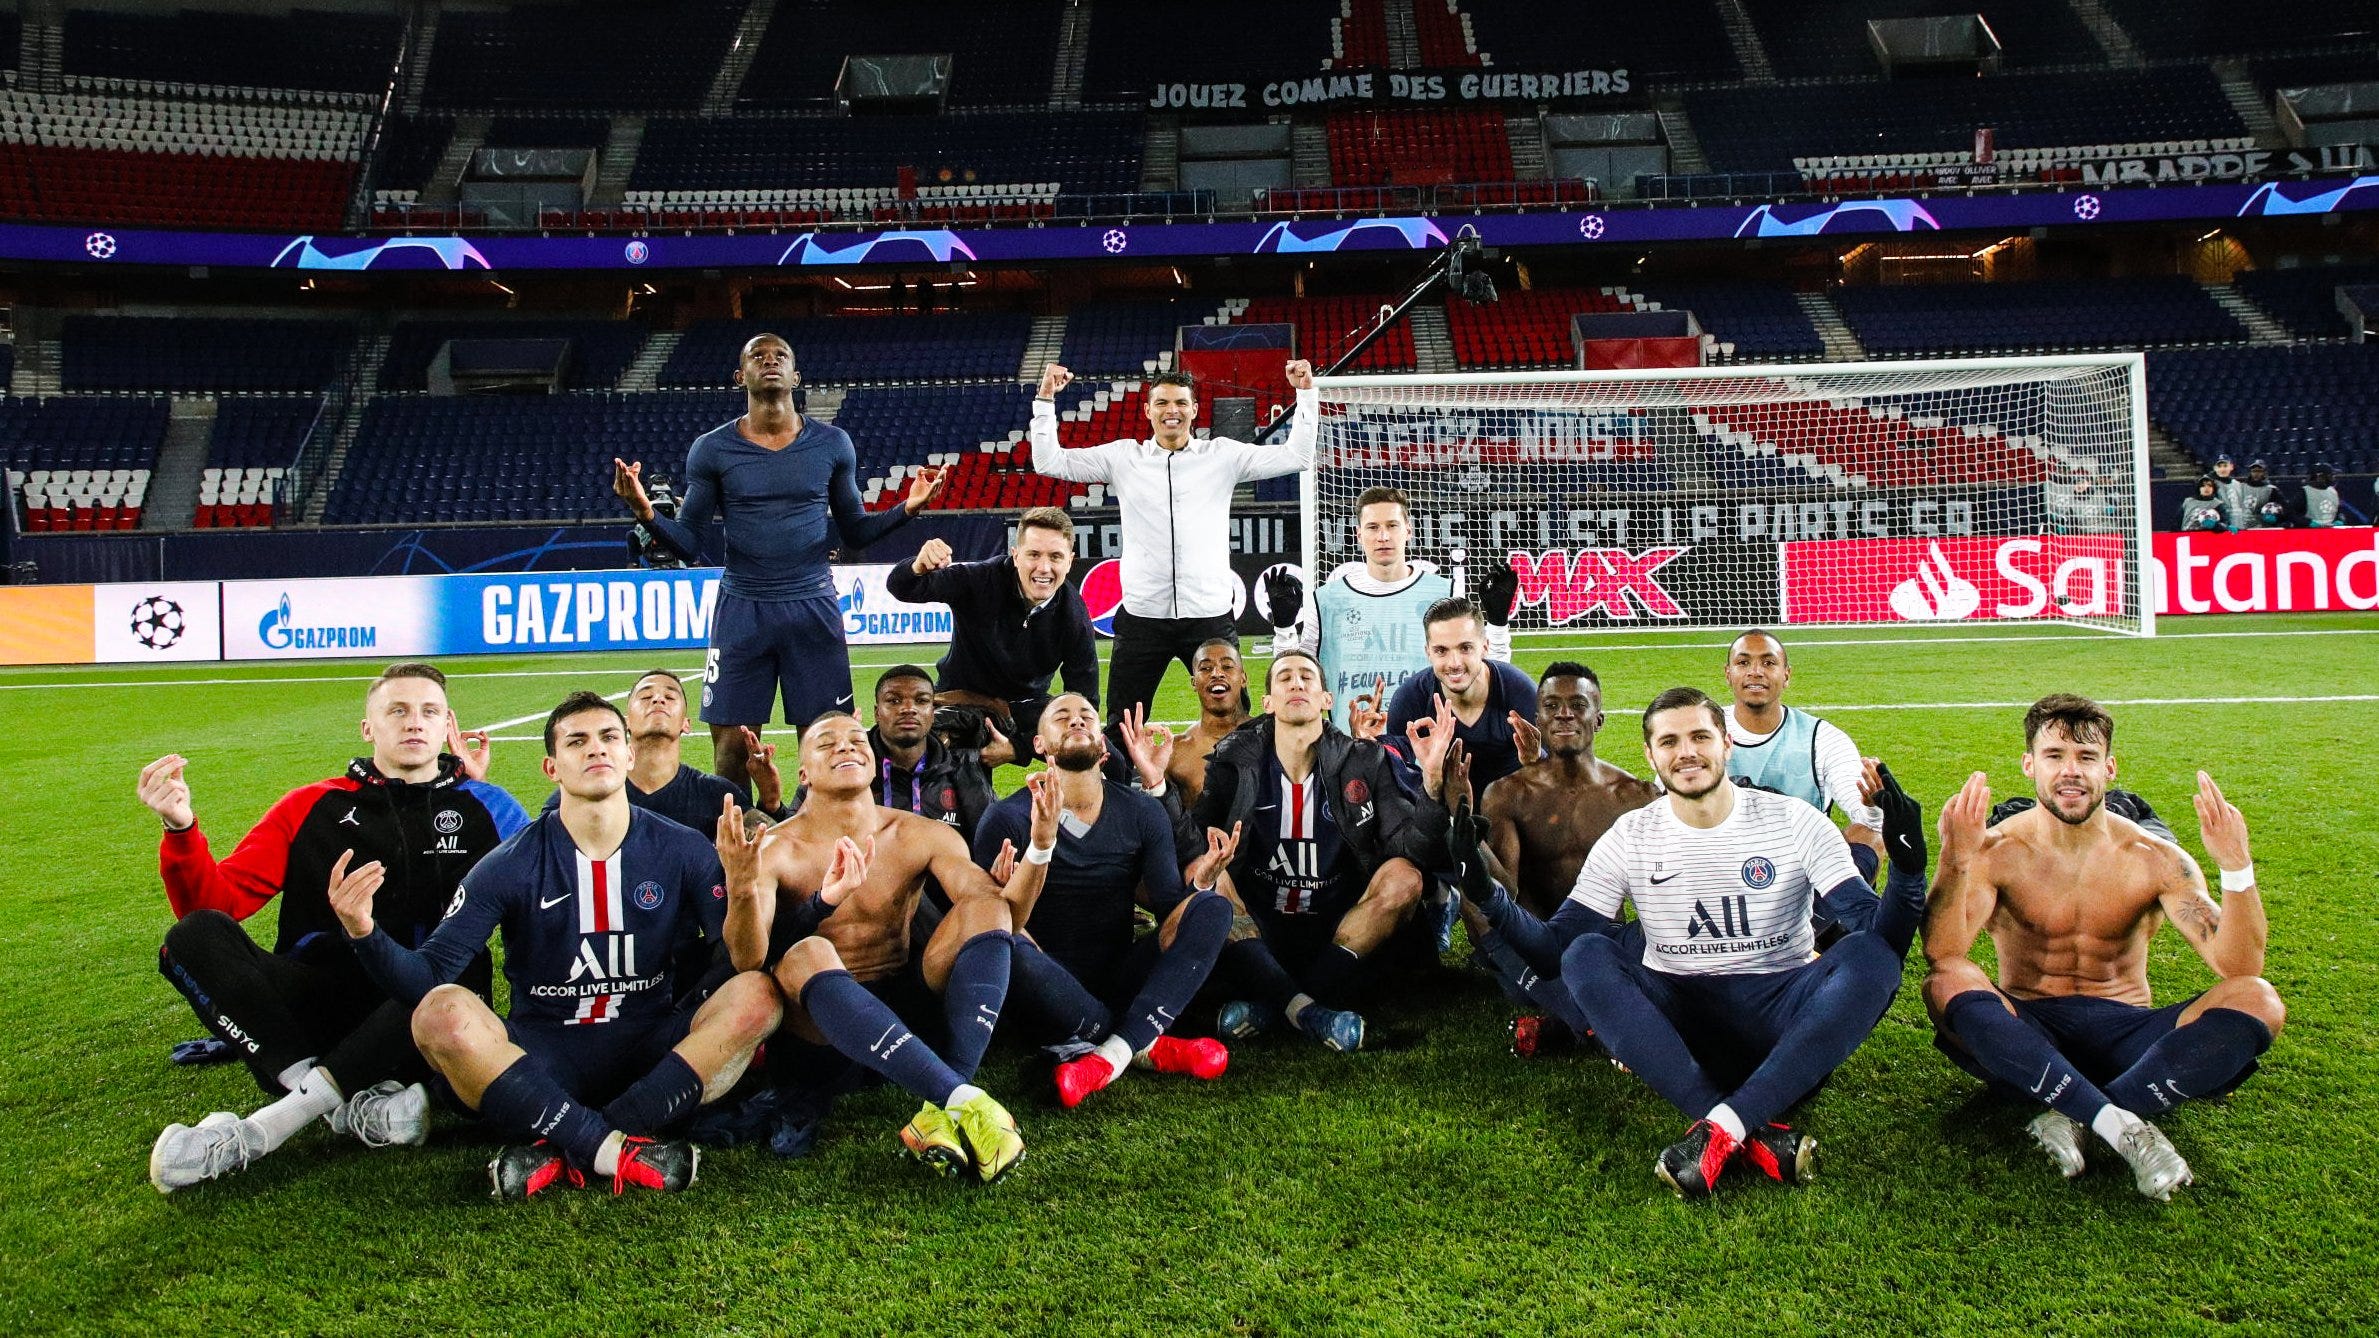  The image shows several Paris Saint Germain football players celebrating a victory in a match against Borussia Dortmund in the Parc des Princes stadium.